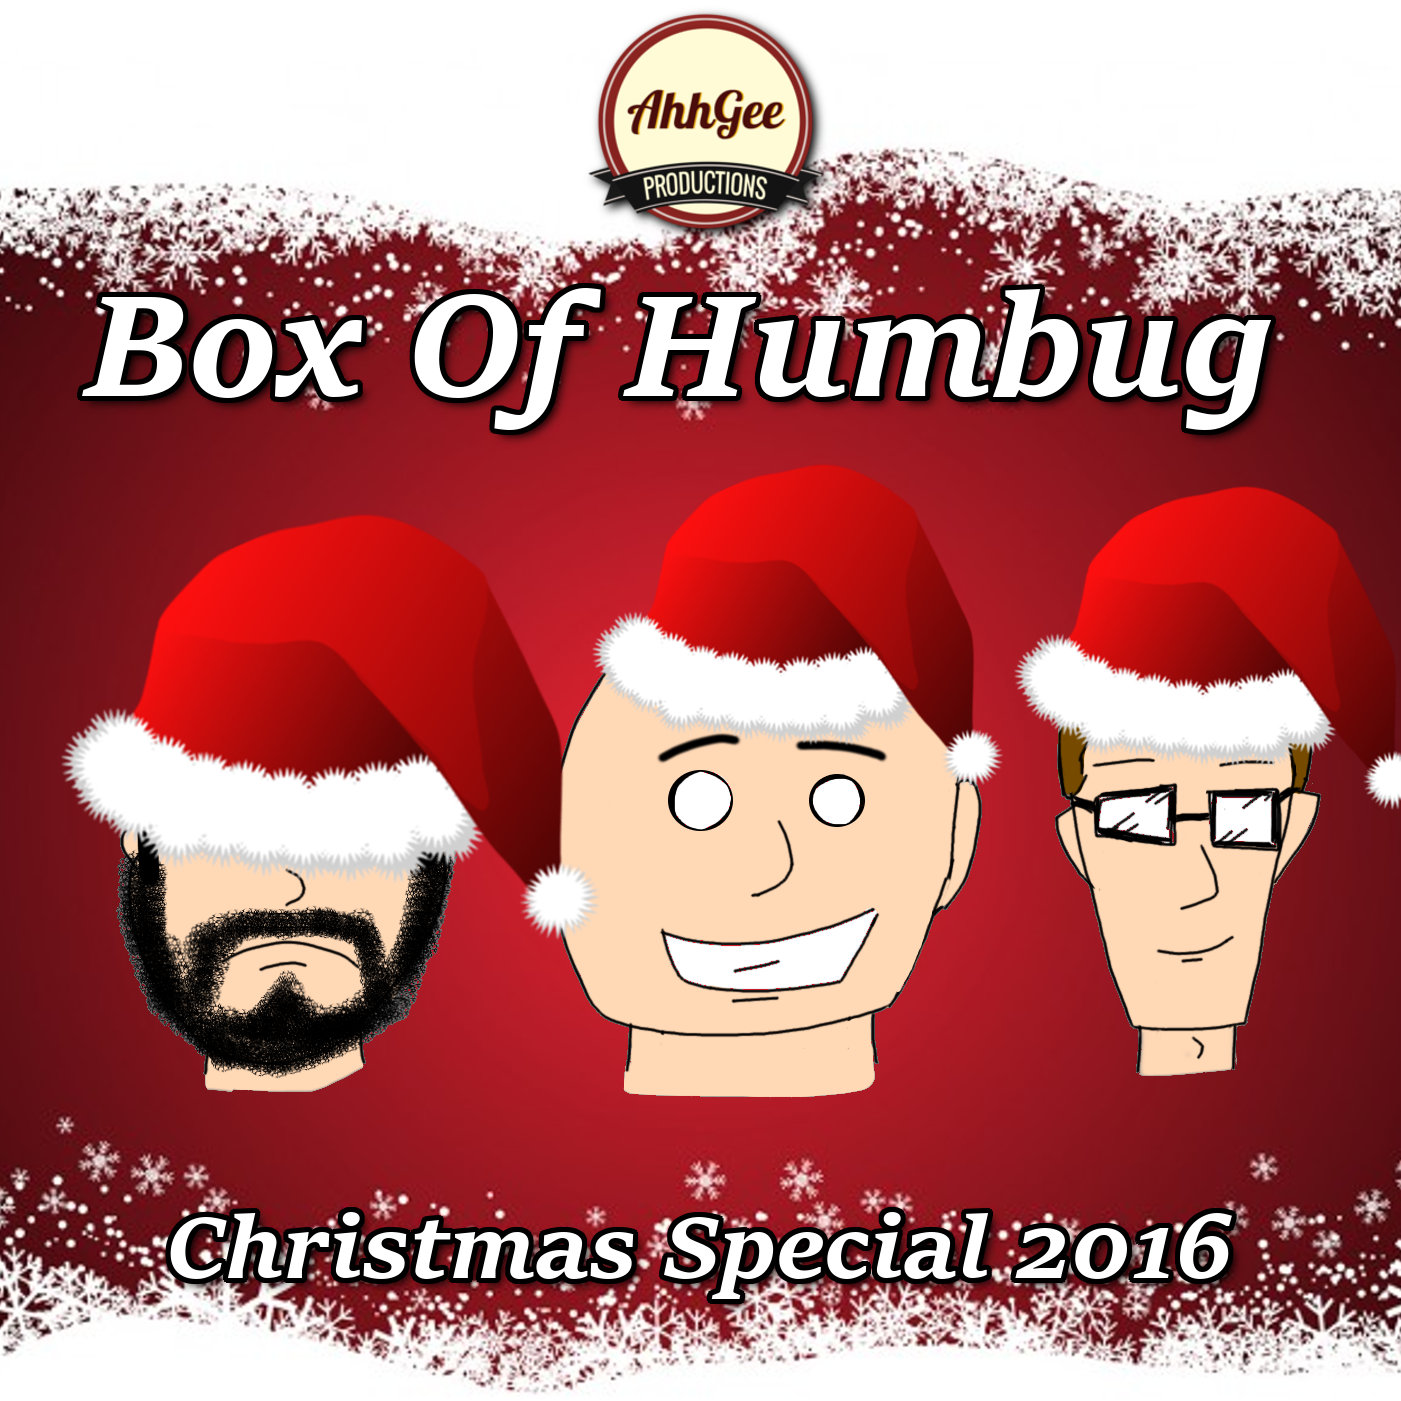 The AhhGee Box Of Humbug Christmas Special 2016